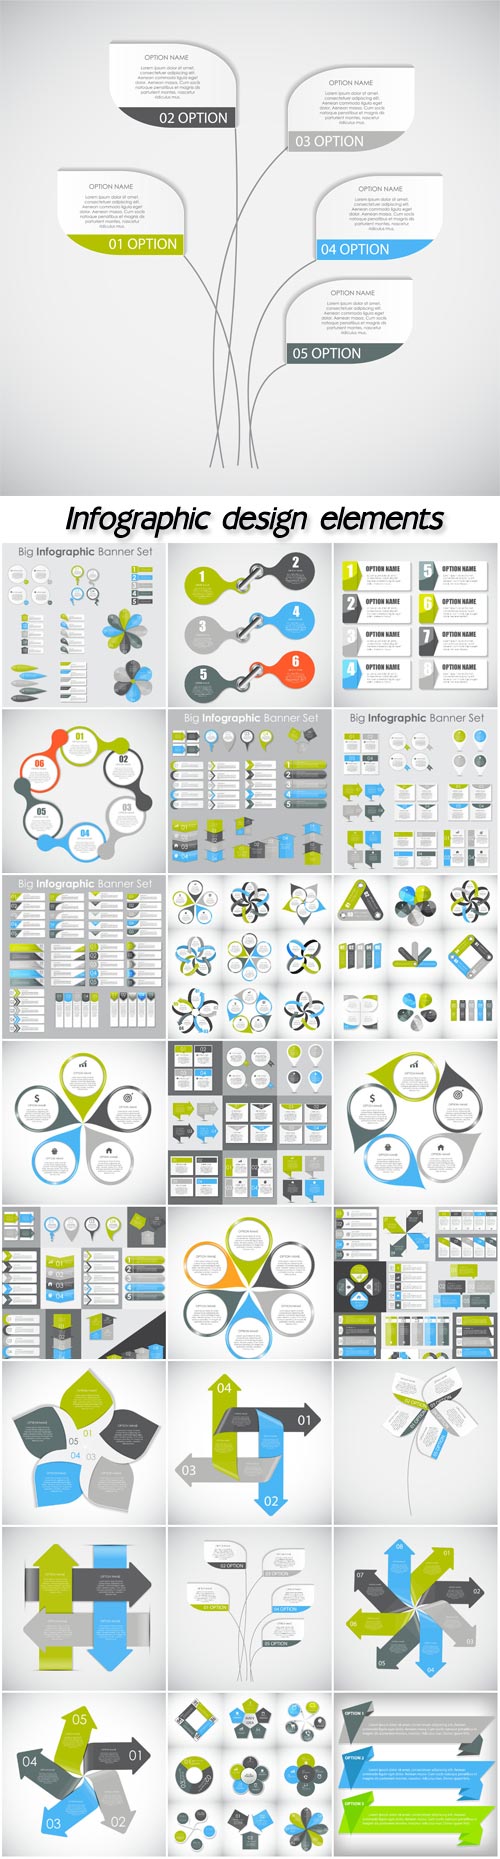 Infographic design elements for your business, vector illustration